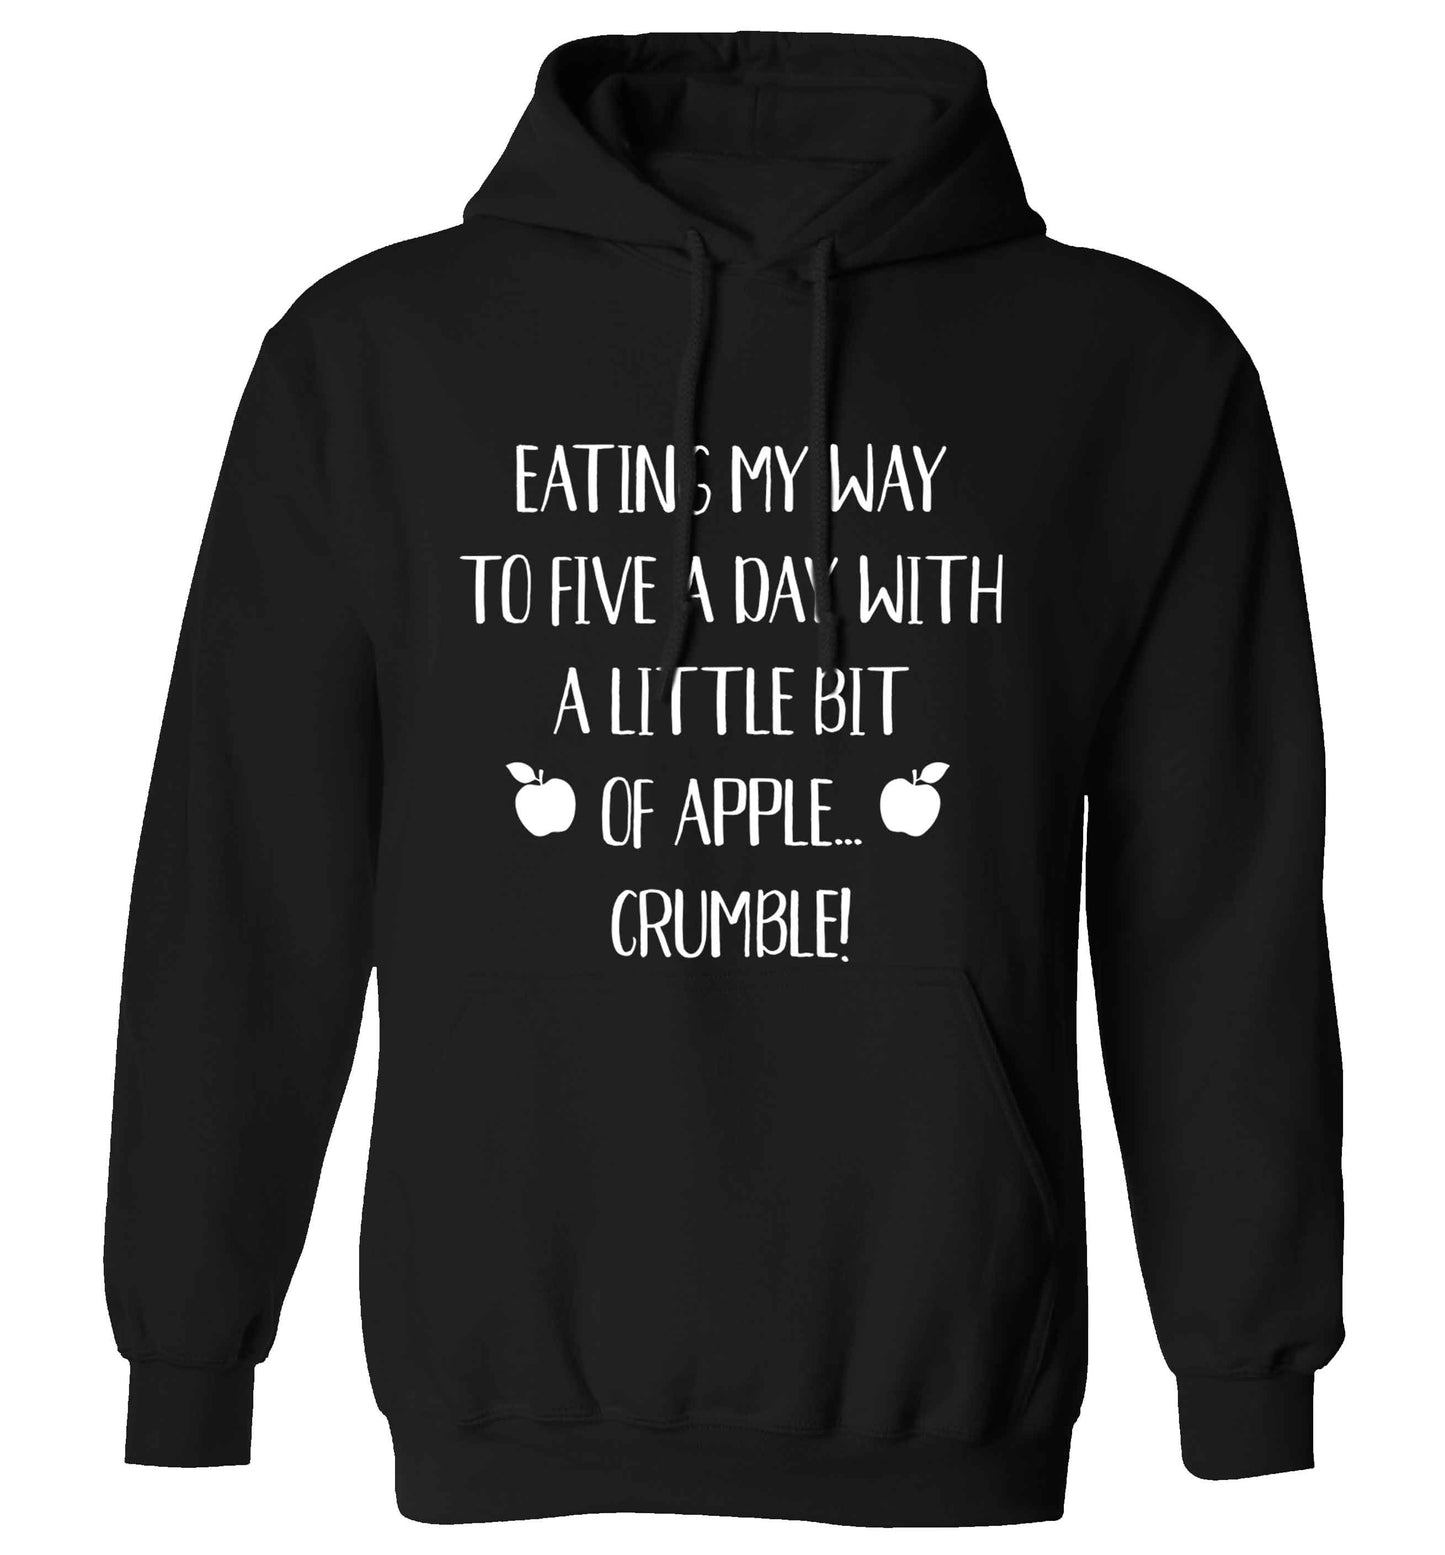 Eating my way to five a day with a little bit of apple crumble adults unisex black hoodie 2XL